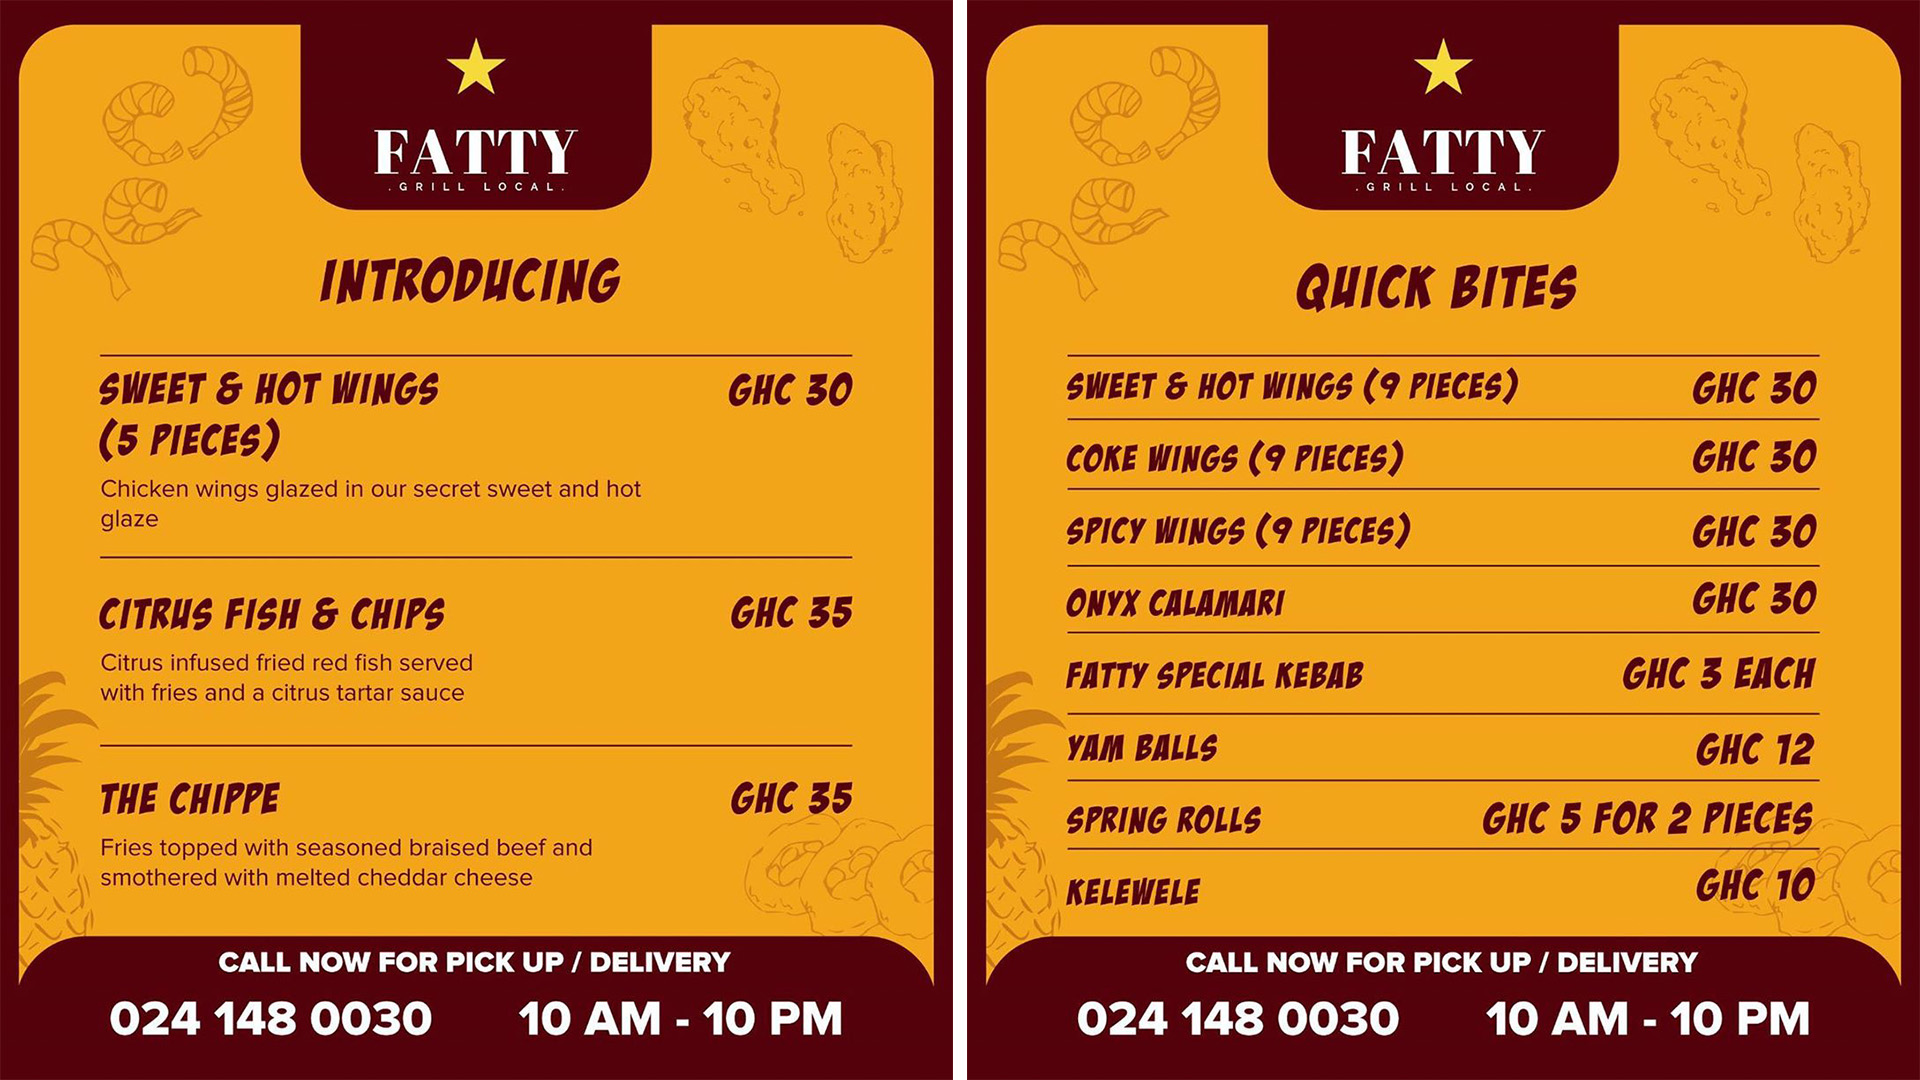 Fatty Grill Local Menu and Prices